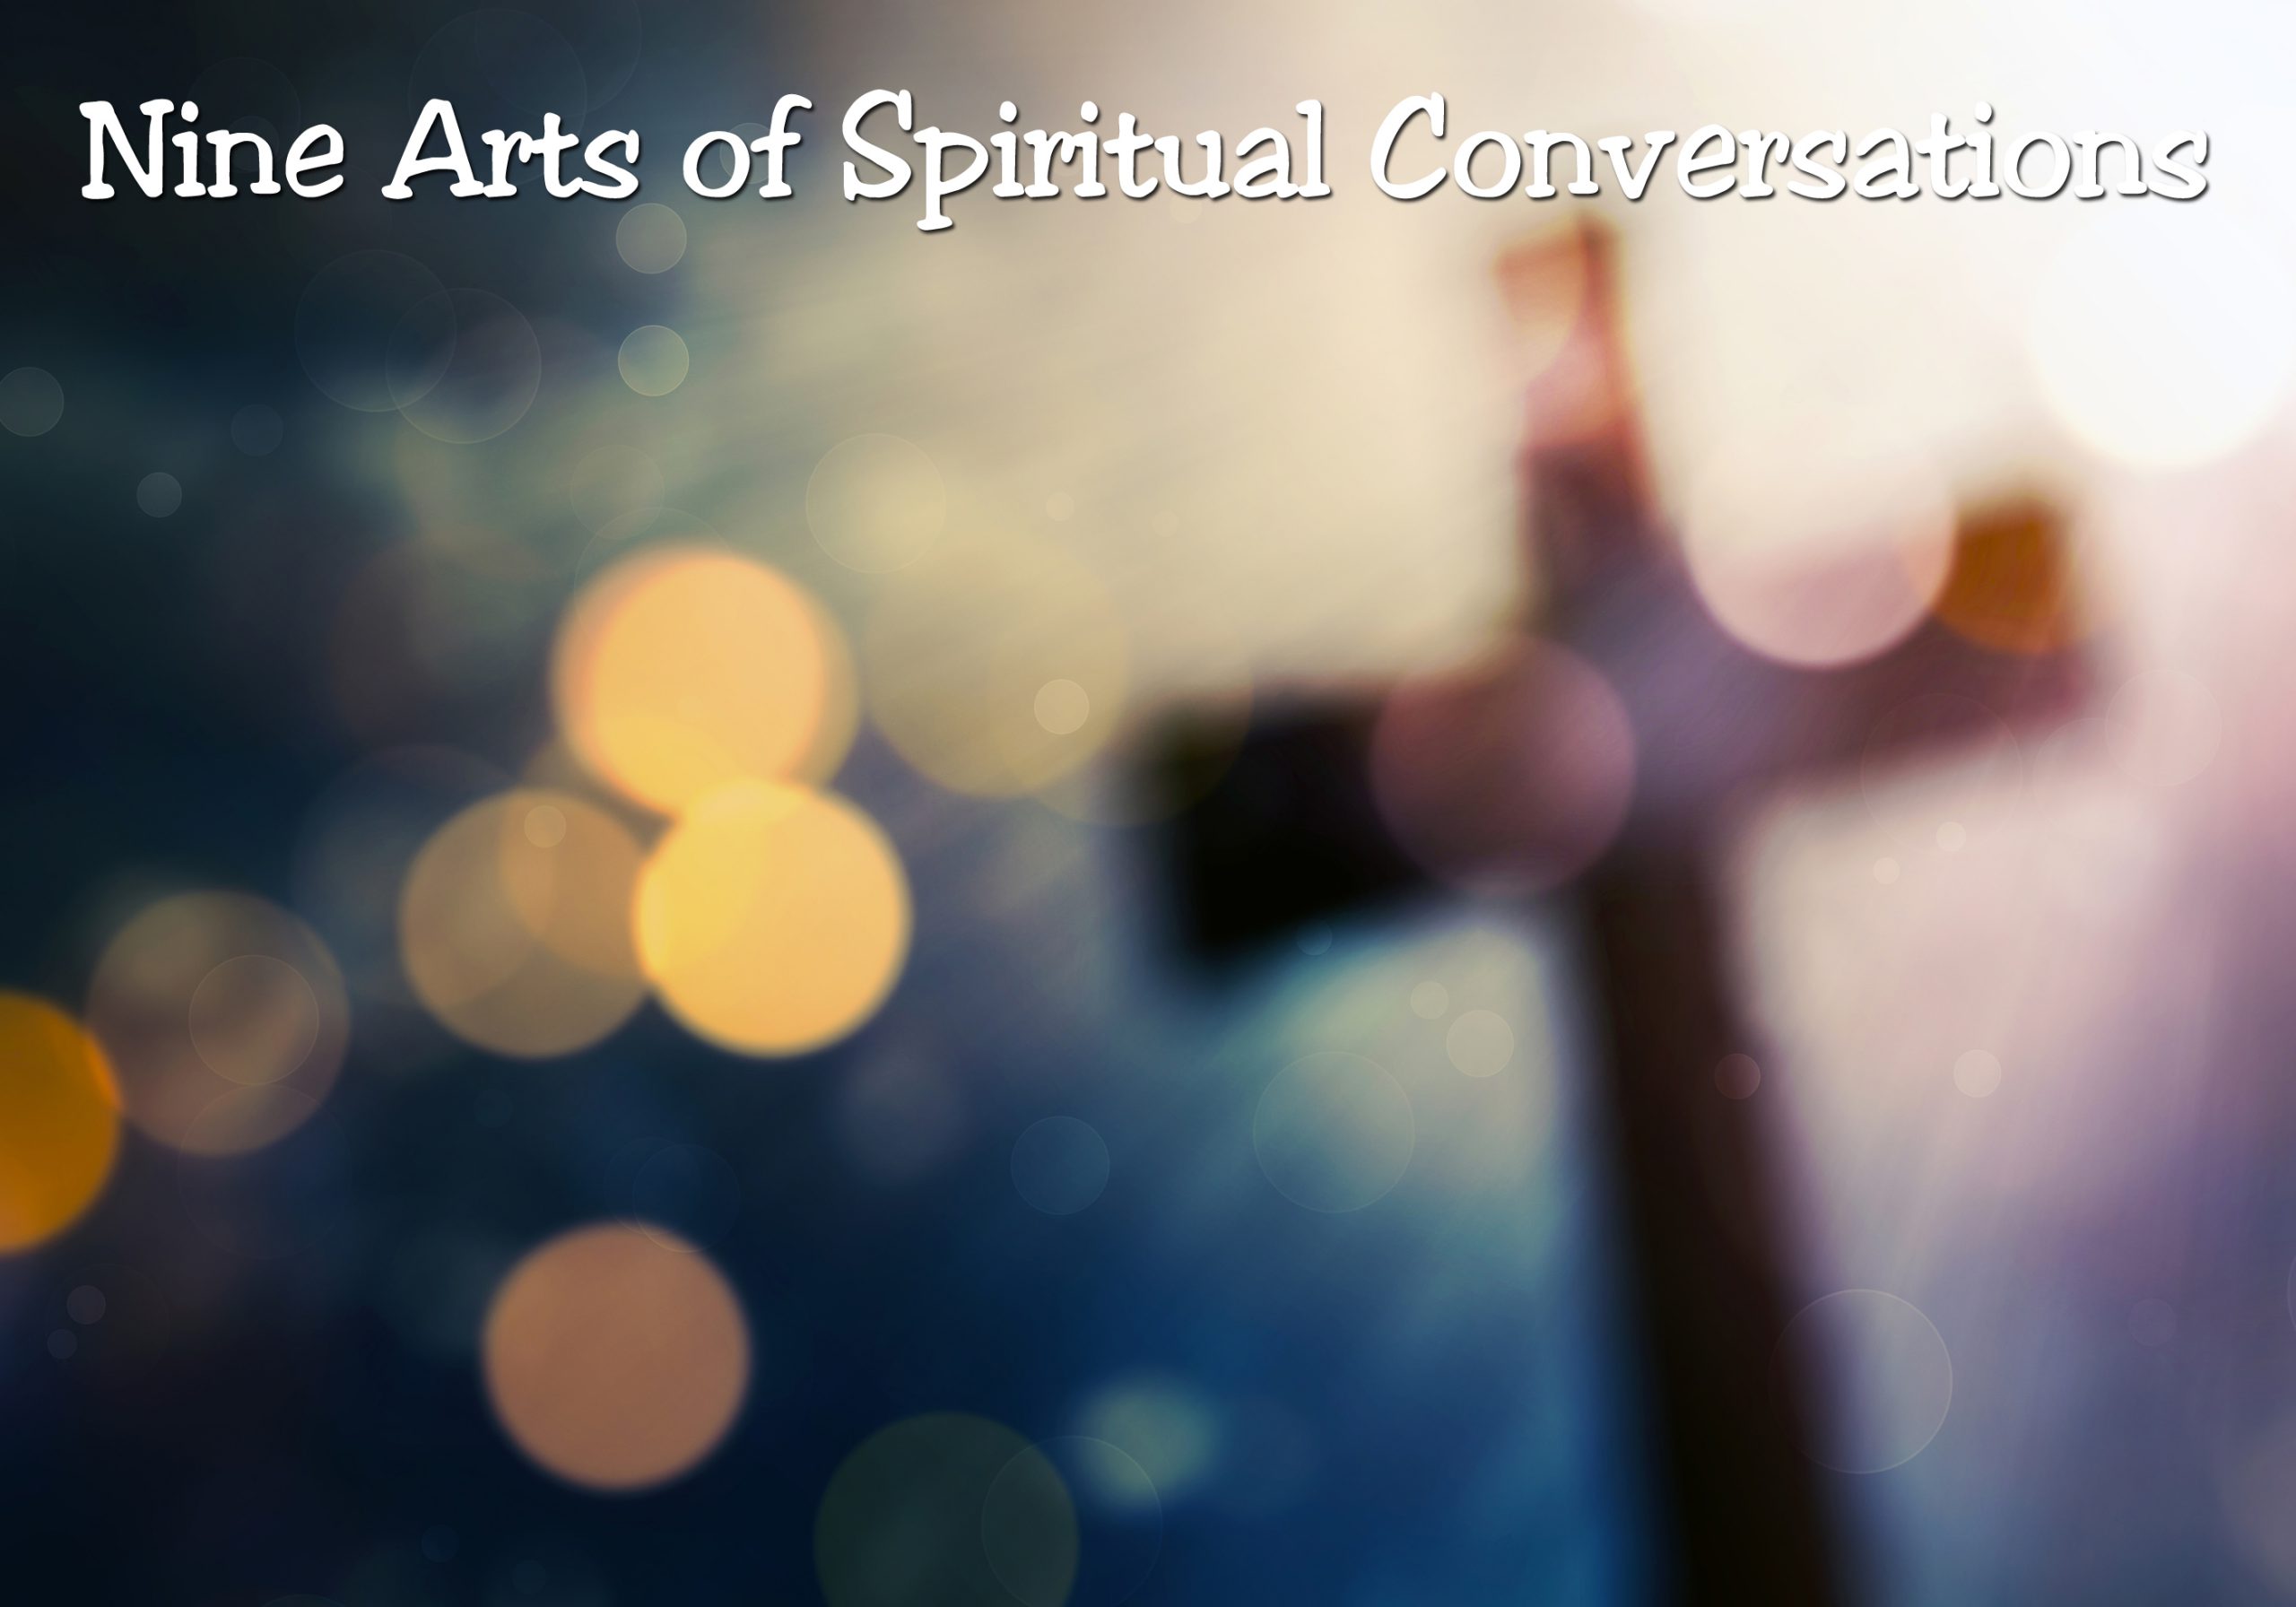 The Heart of the 9 Arts of Spiritual Conversations